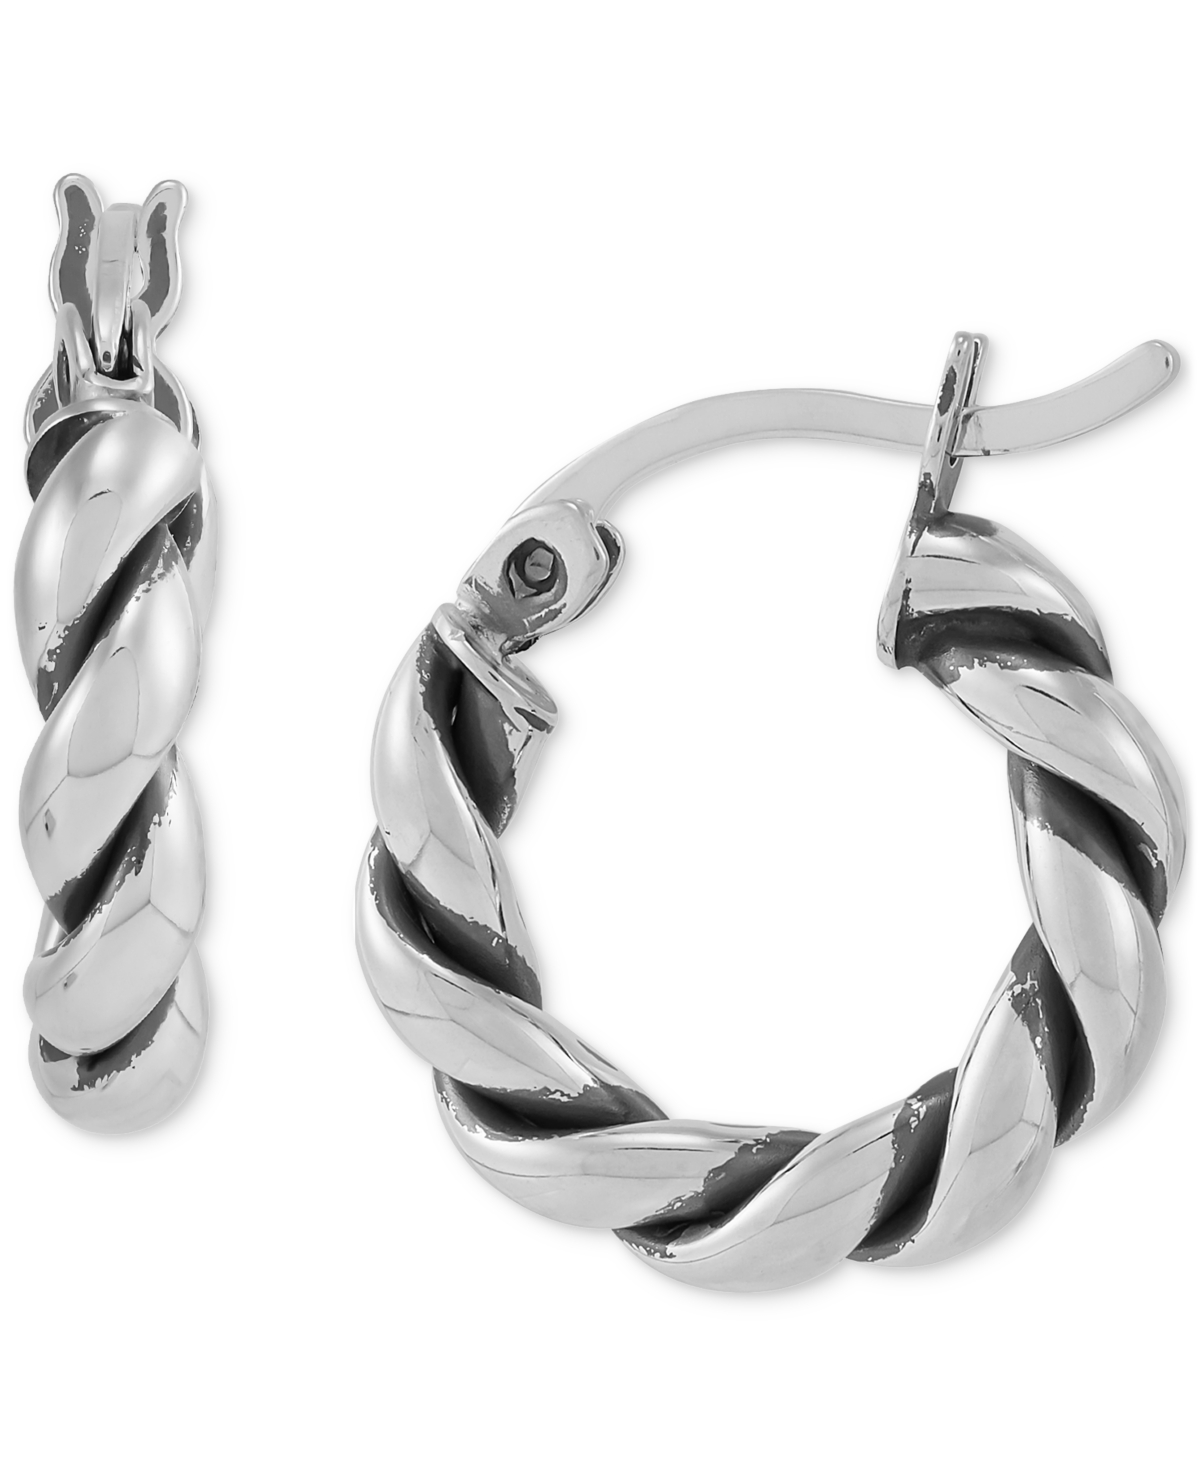 Oxidized Twist Tube Small Hoop Earrings in Sterling Silver, 15mm , Created for Macy's - Silver